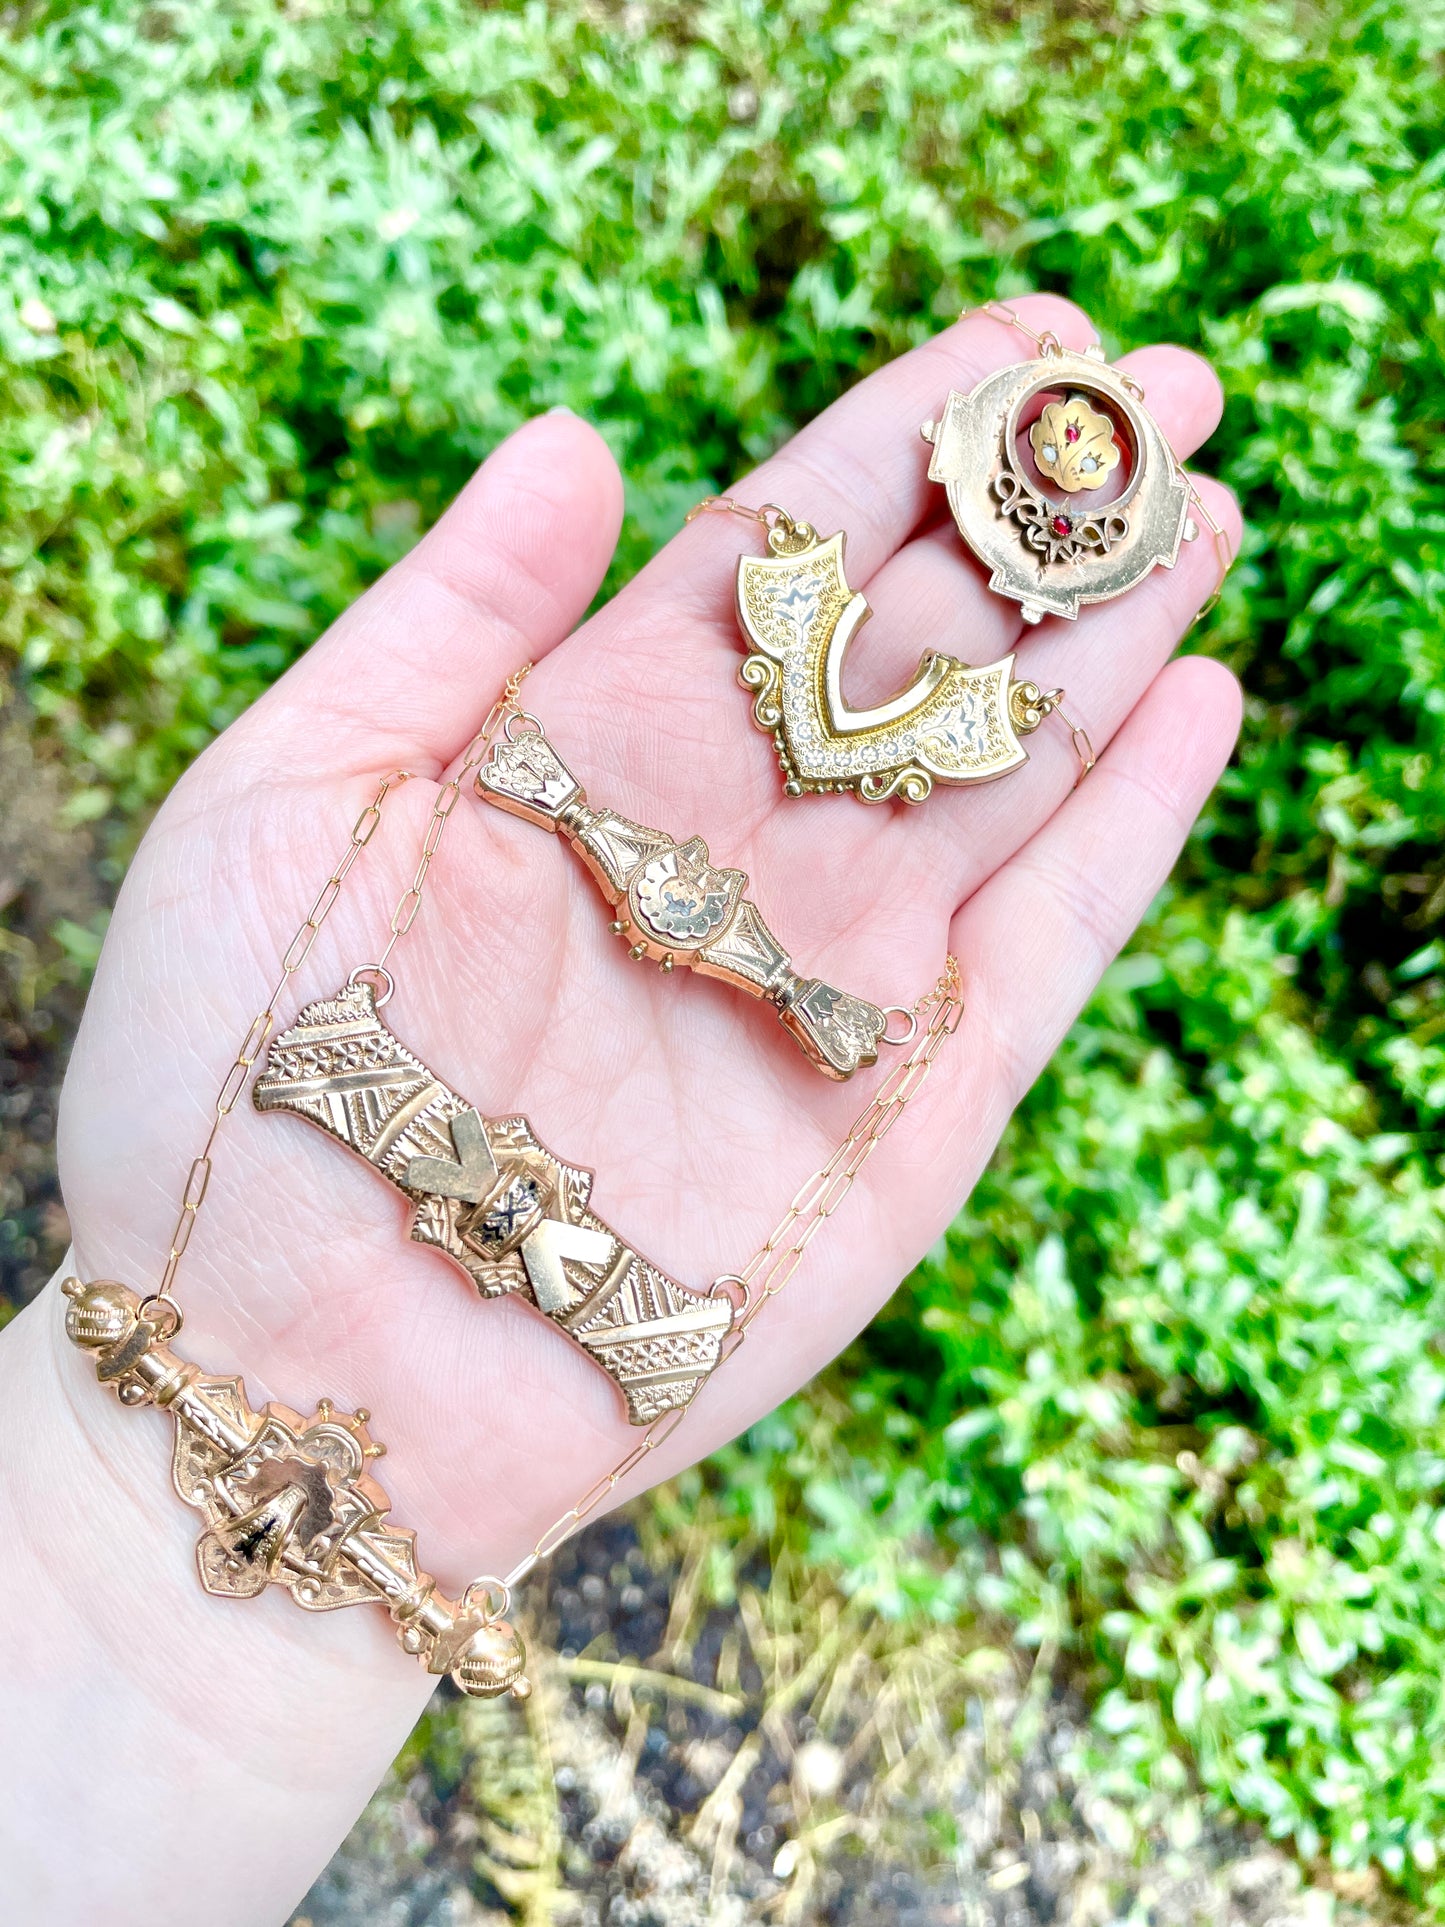 five brooch and bar pin conversion necklaces displayed on palm side of a left hand hovering over a green foliage background